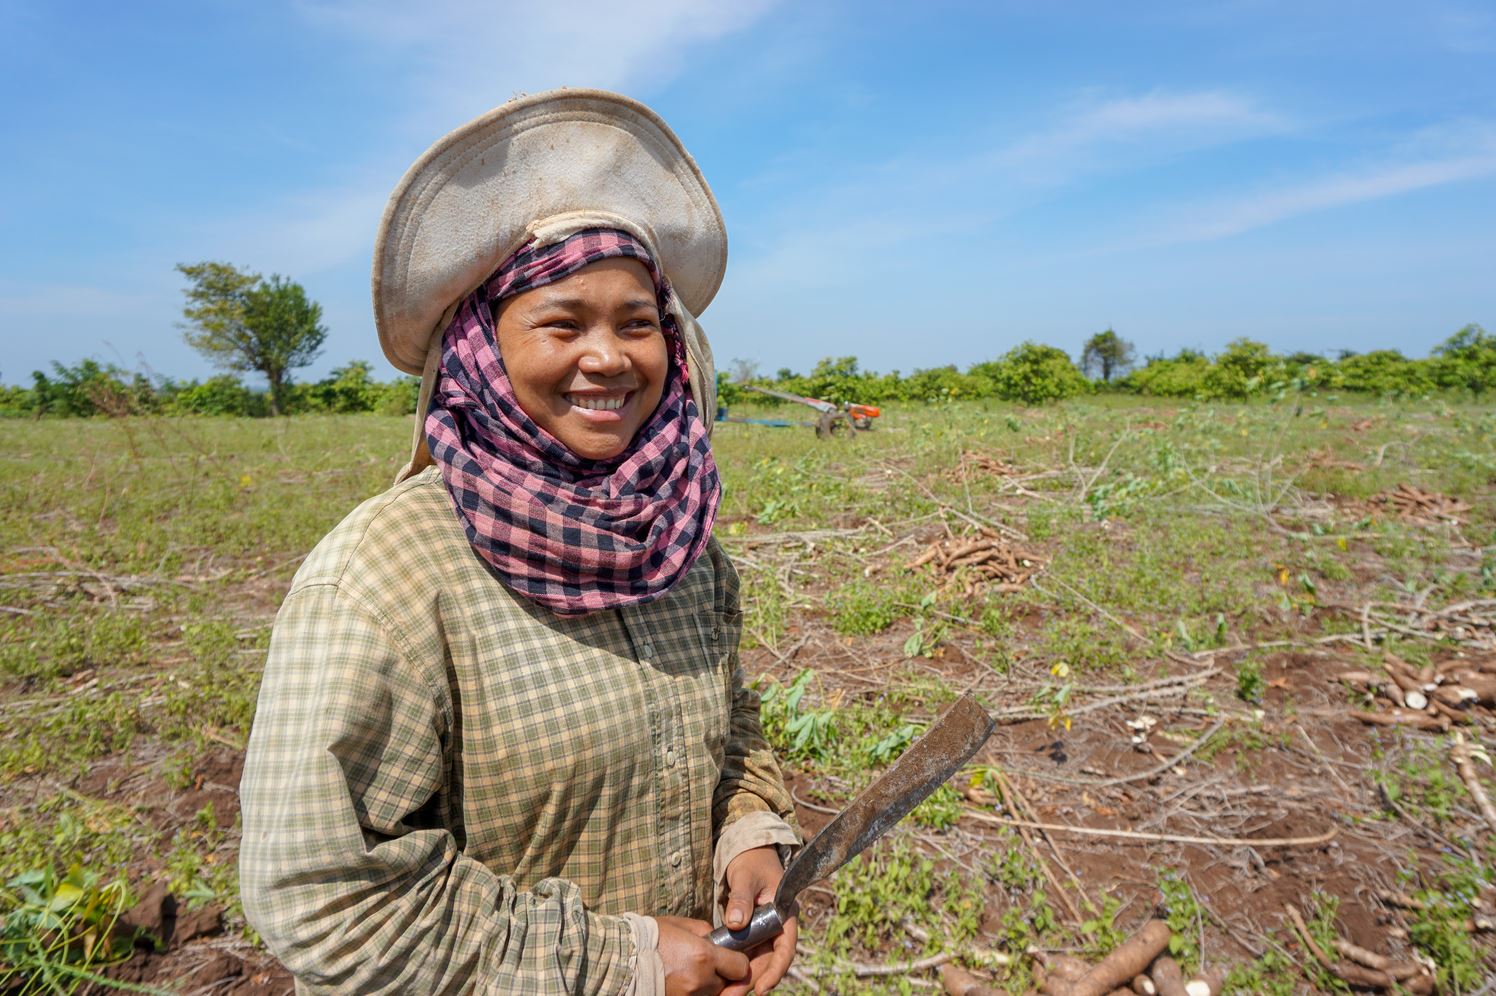 Pou Chanthea is a cassava farmer in Tboung Khmum province in central Cambodia. Her and her family are heavily affected by the plant diseases sweeping through Cambodia's cassava plantations.